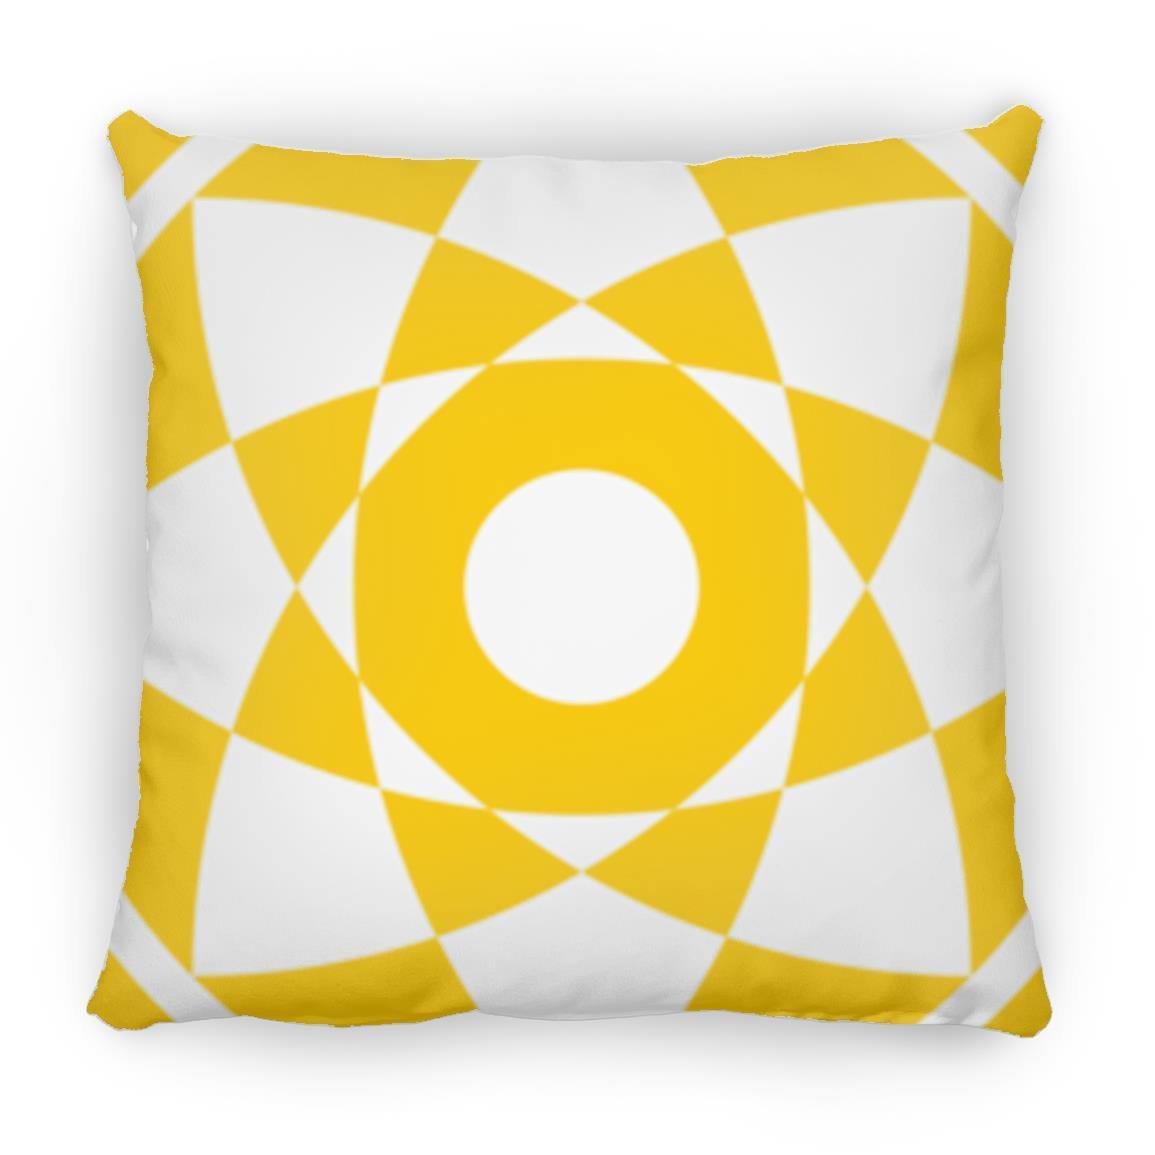 Crop Circle Pillow - Kenilworth Castle - Shapes of Wisdom